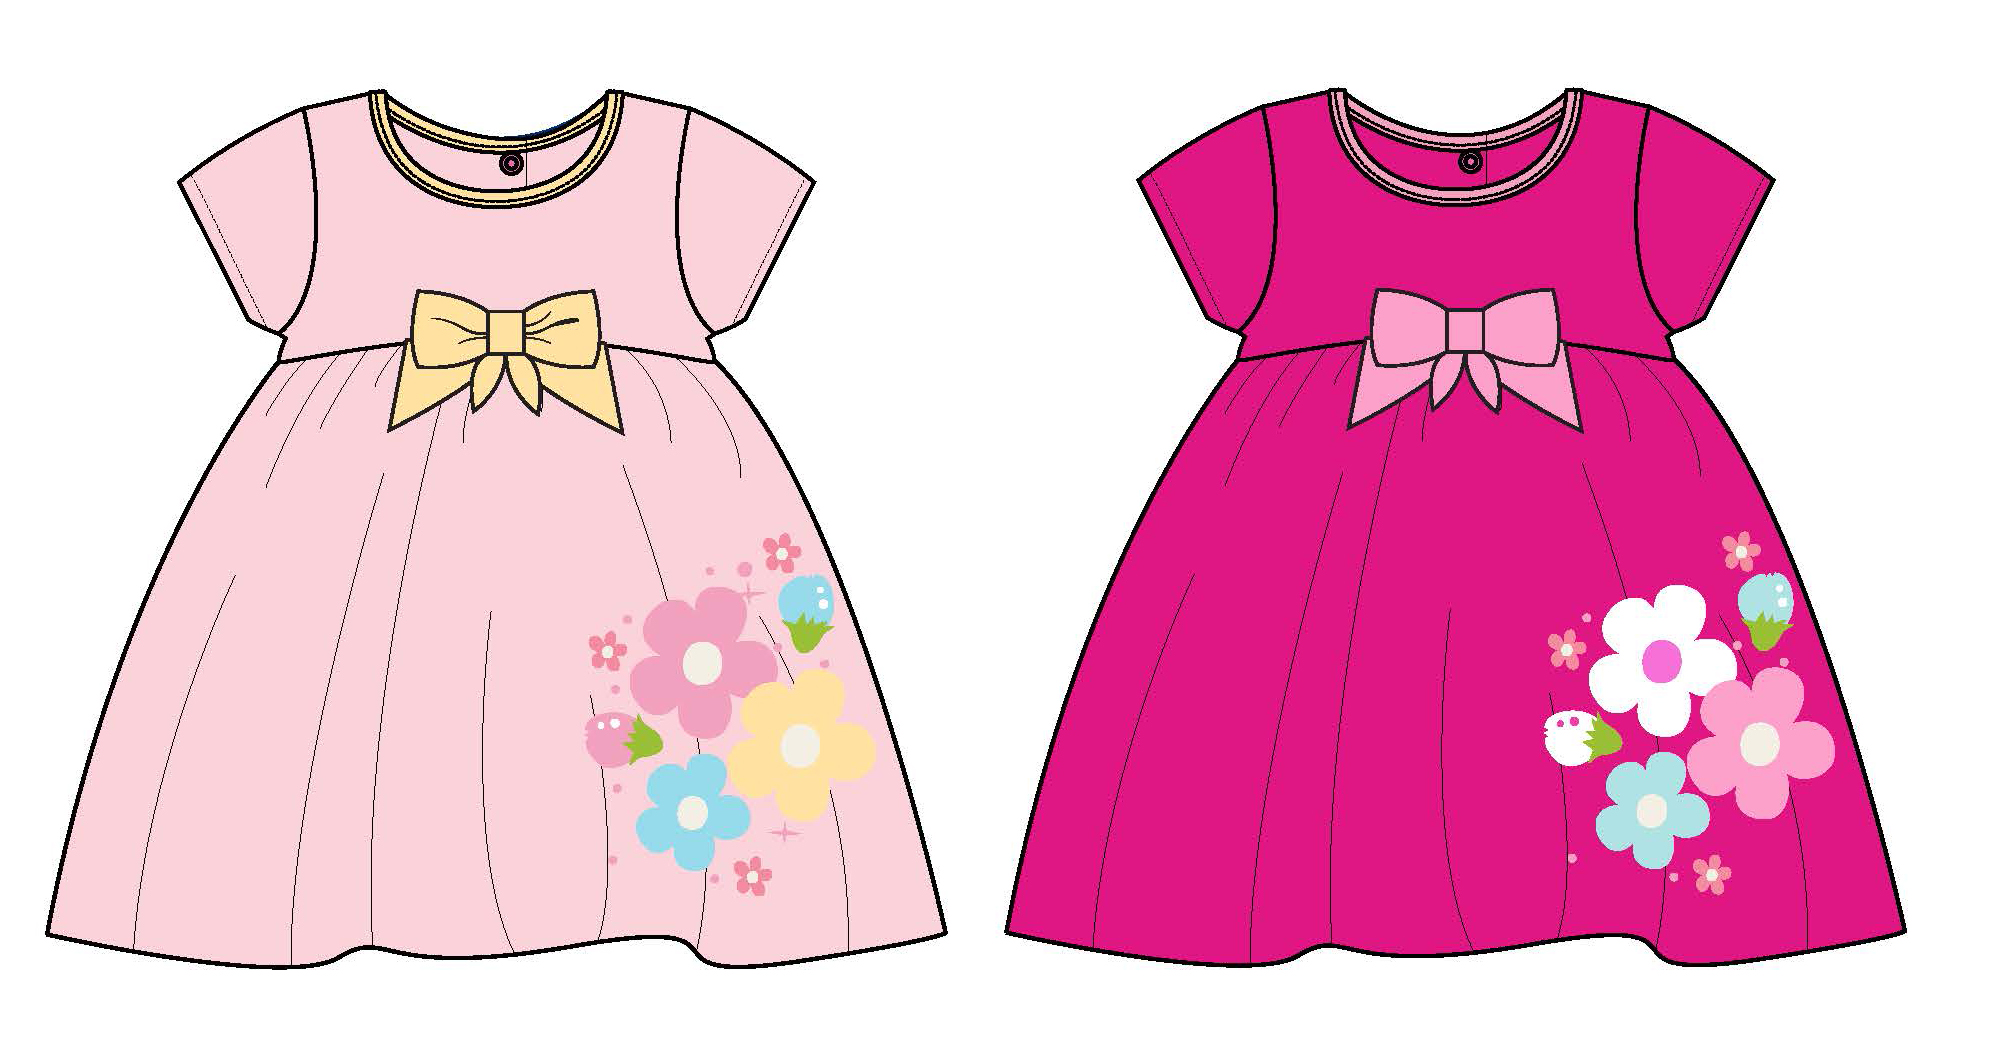 Baby Girl's Short-Sleeve Knit DRESS w/ Ribbon Bow Embellishment - Floral Print - Size 12M-24M